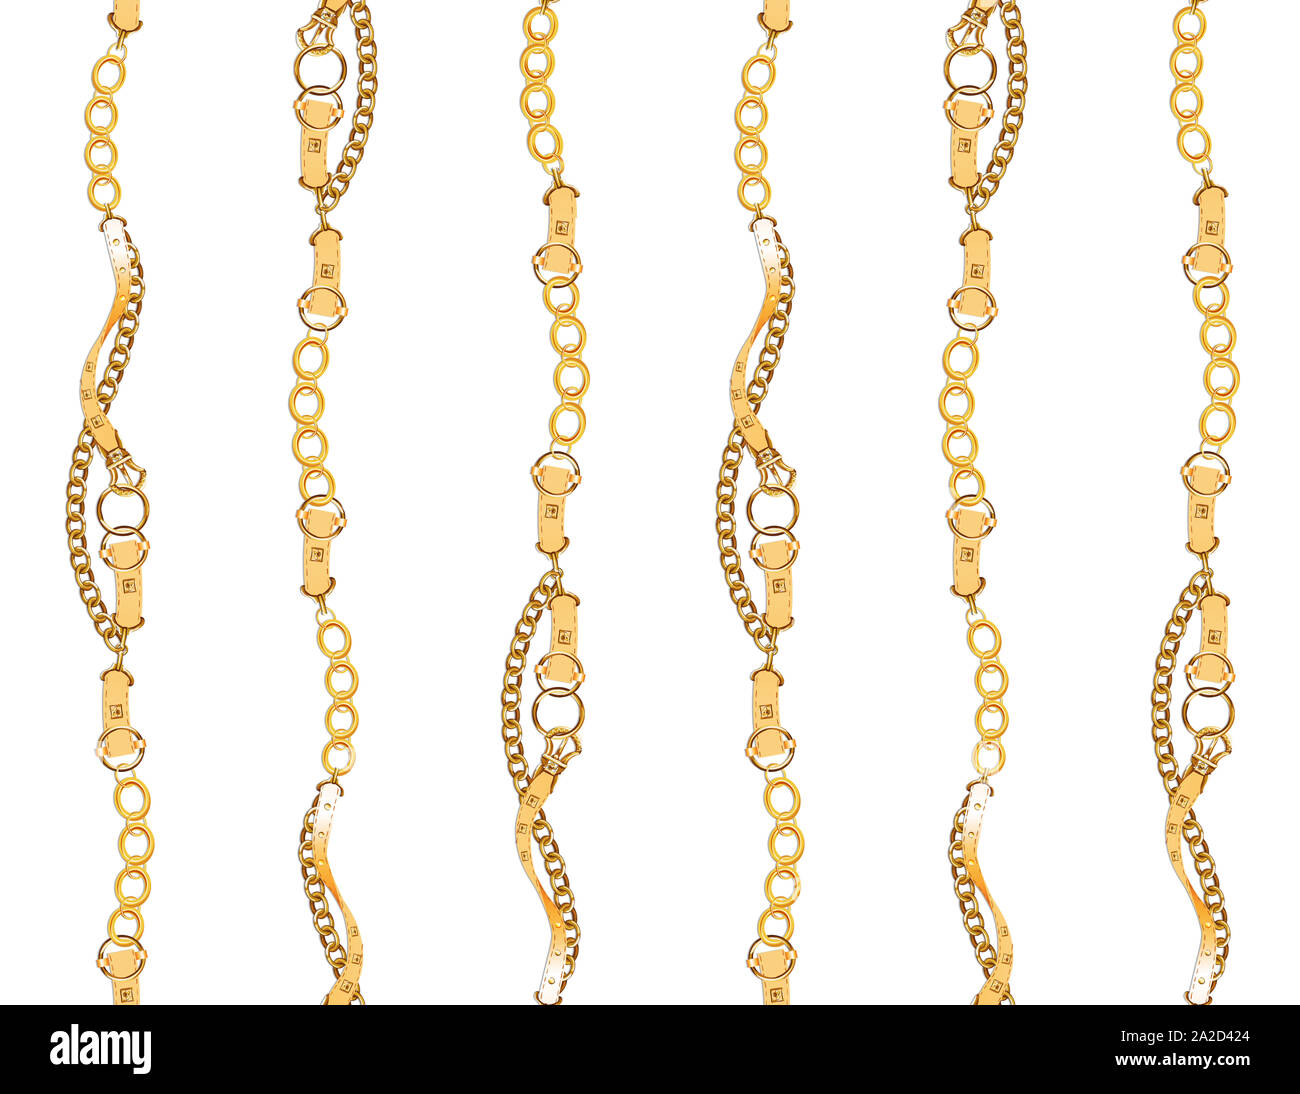 Seamless pattern of golden belts and chains, isolated on white background. Ready for textile print. Stock Photo